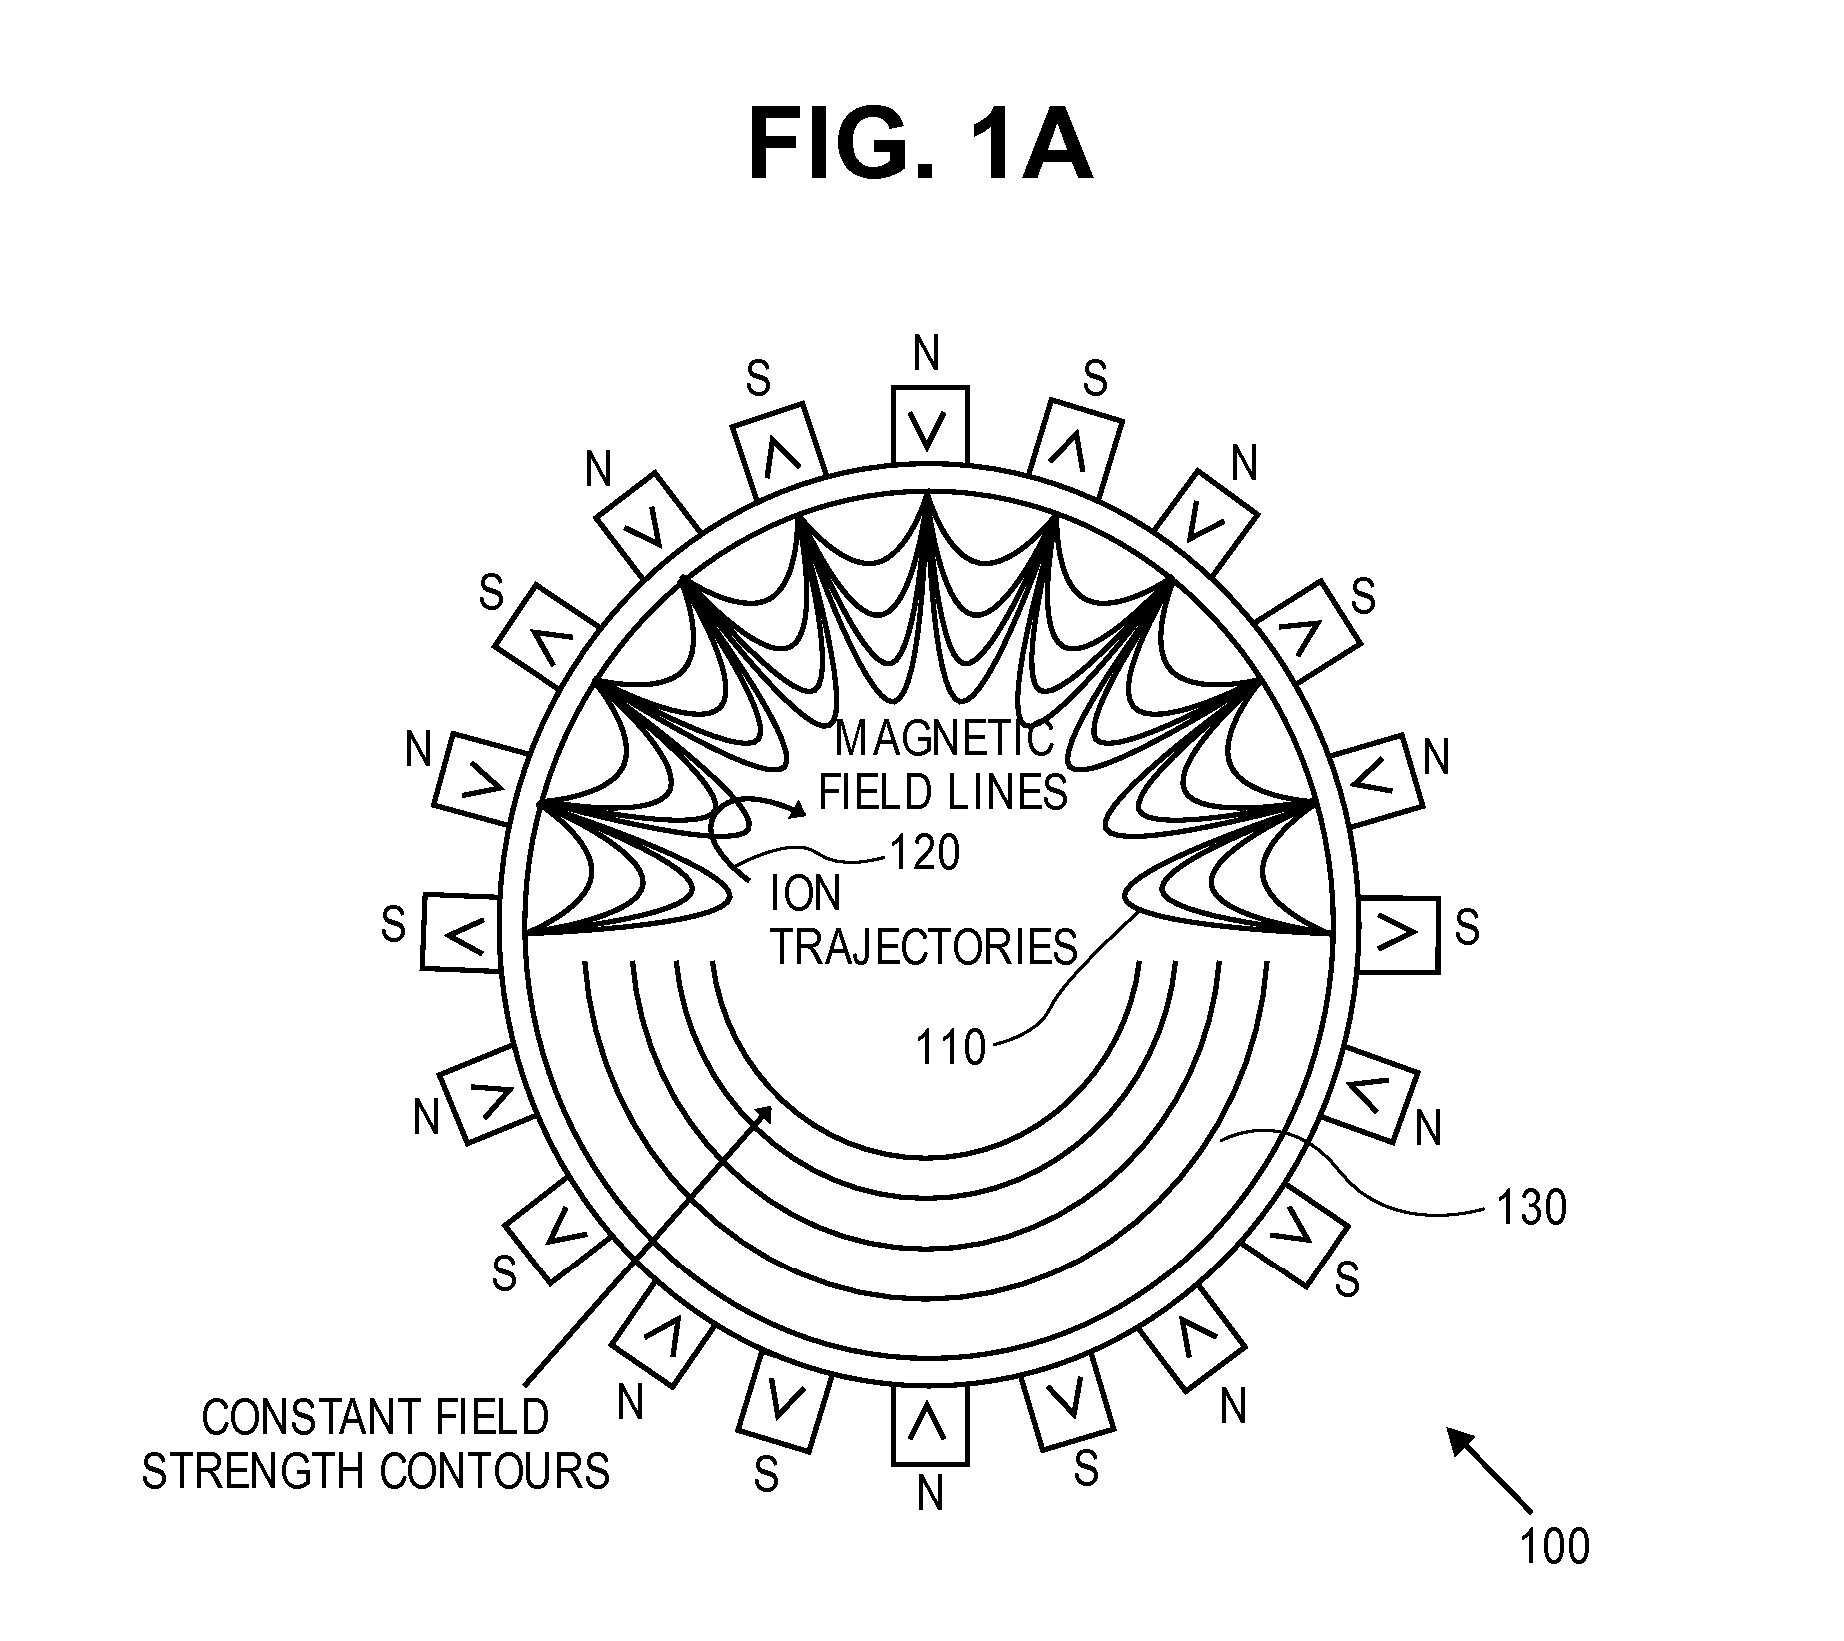 High Brightness - Multiple Beamlets Source for Patterned X-ray Production